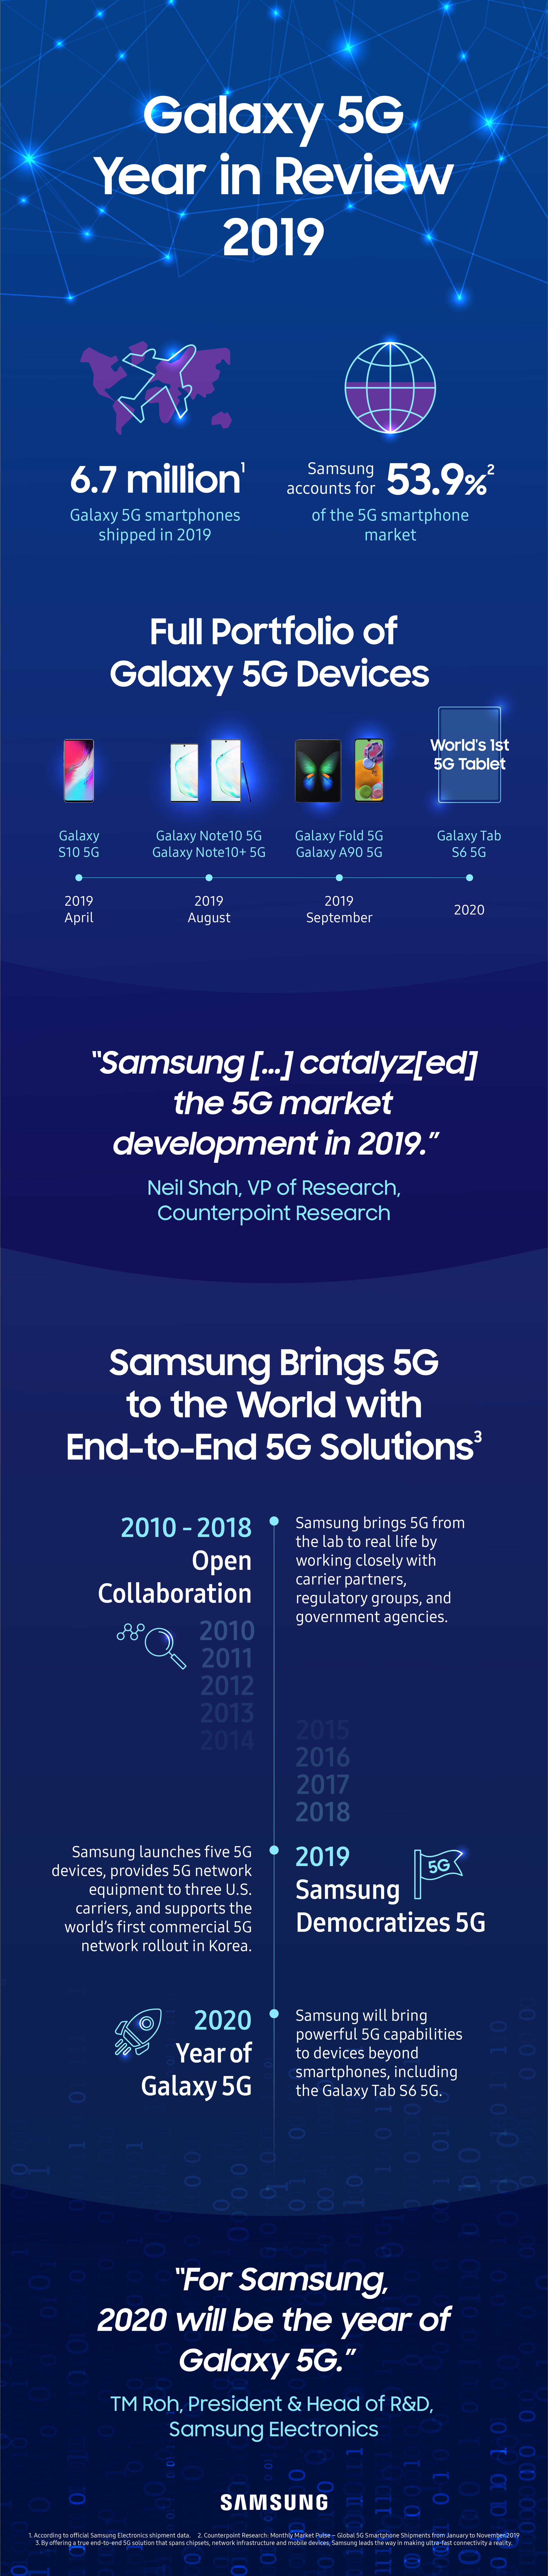 Galaxy 5G Year in Review 2019